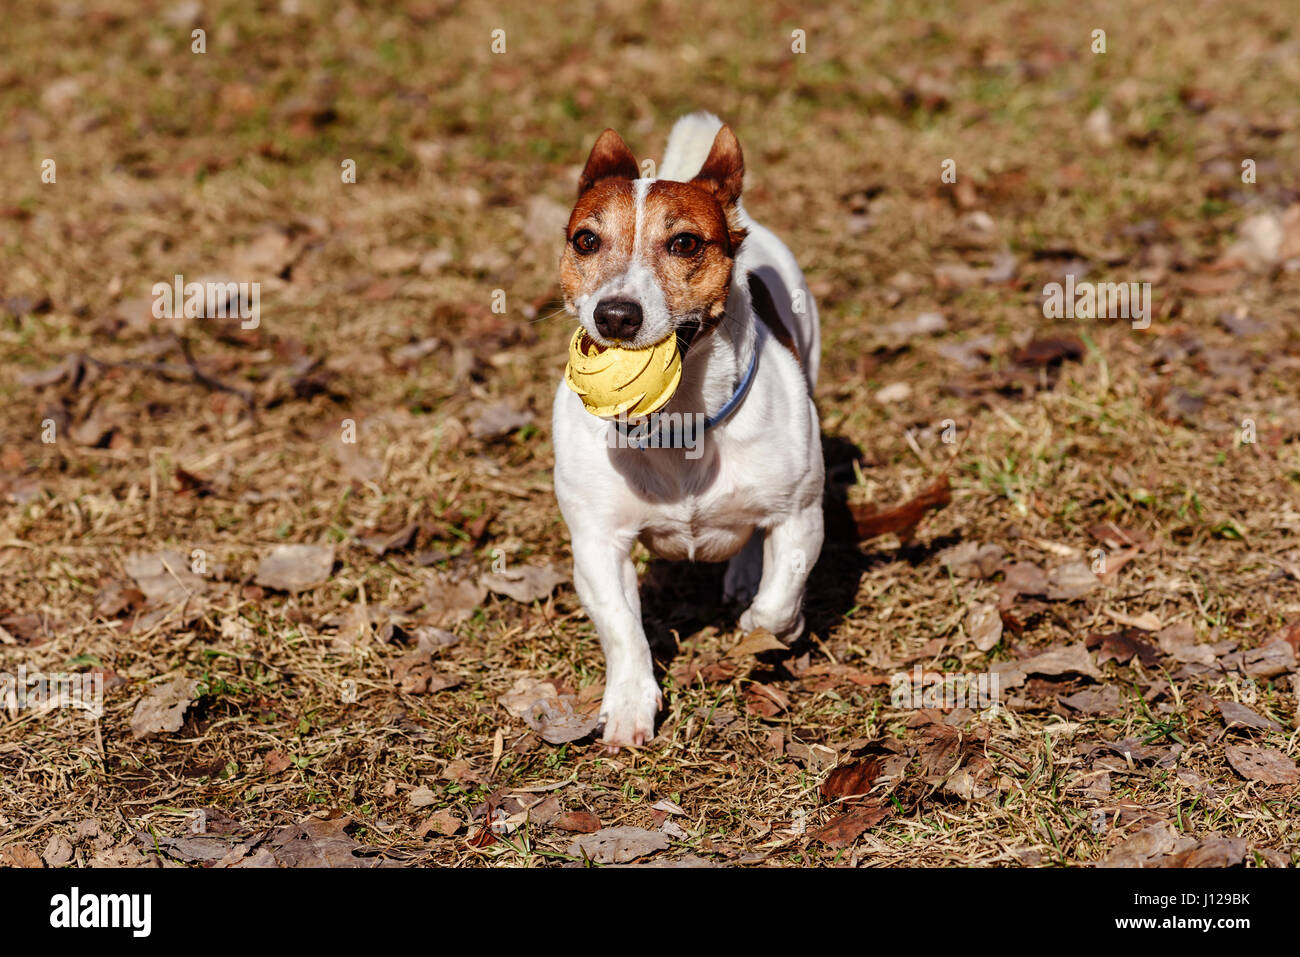 Dog playing with toy rubber ball on last year old leaves Stock Photo